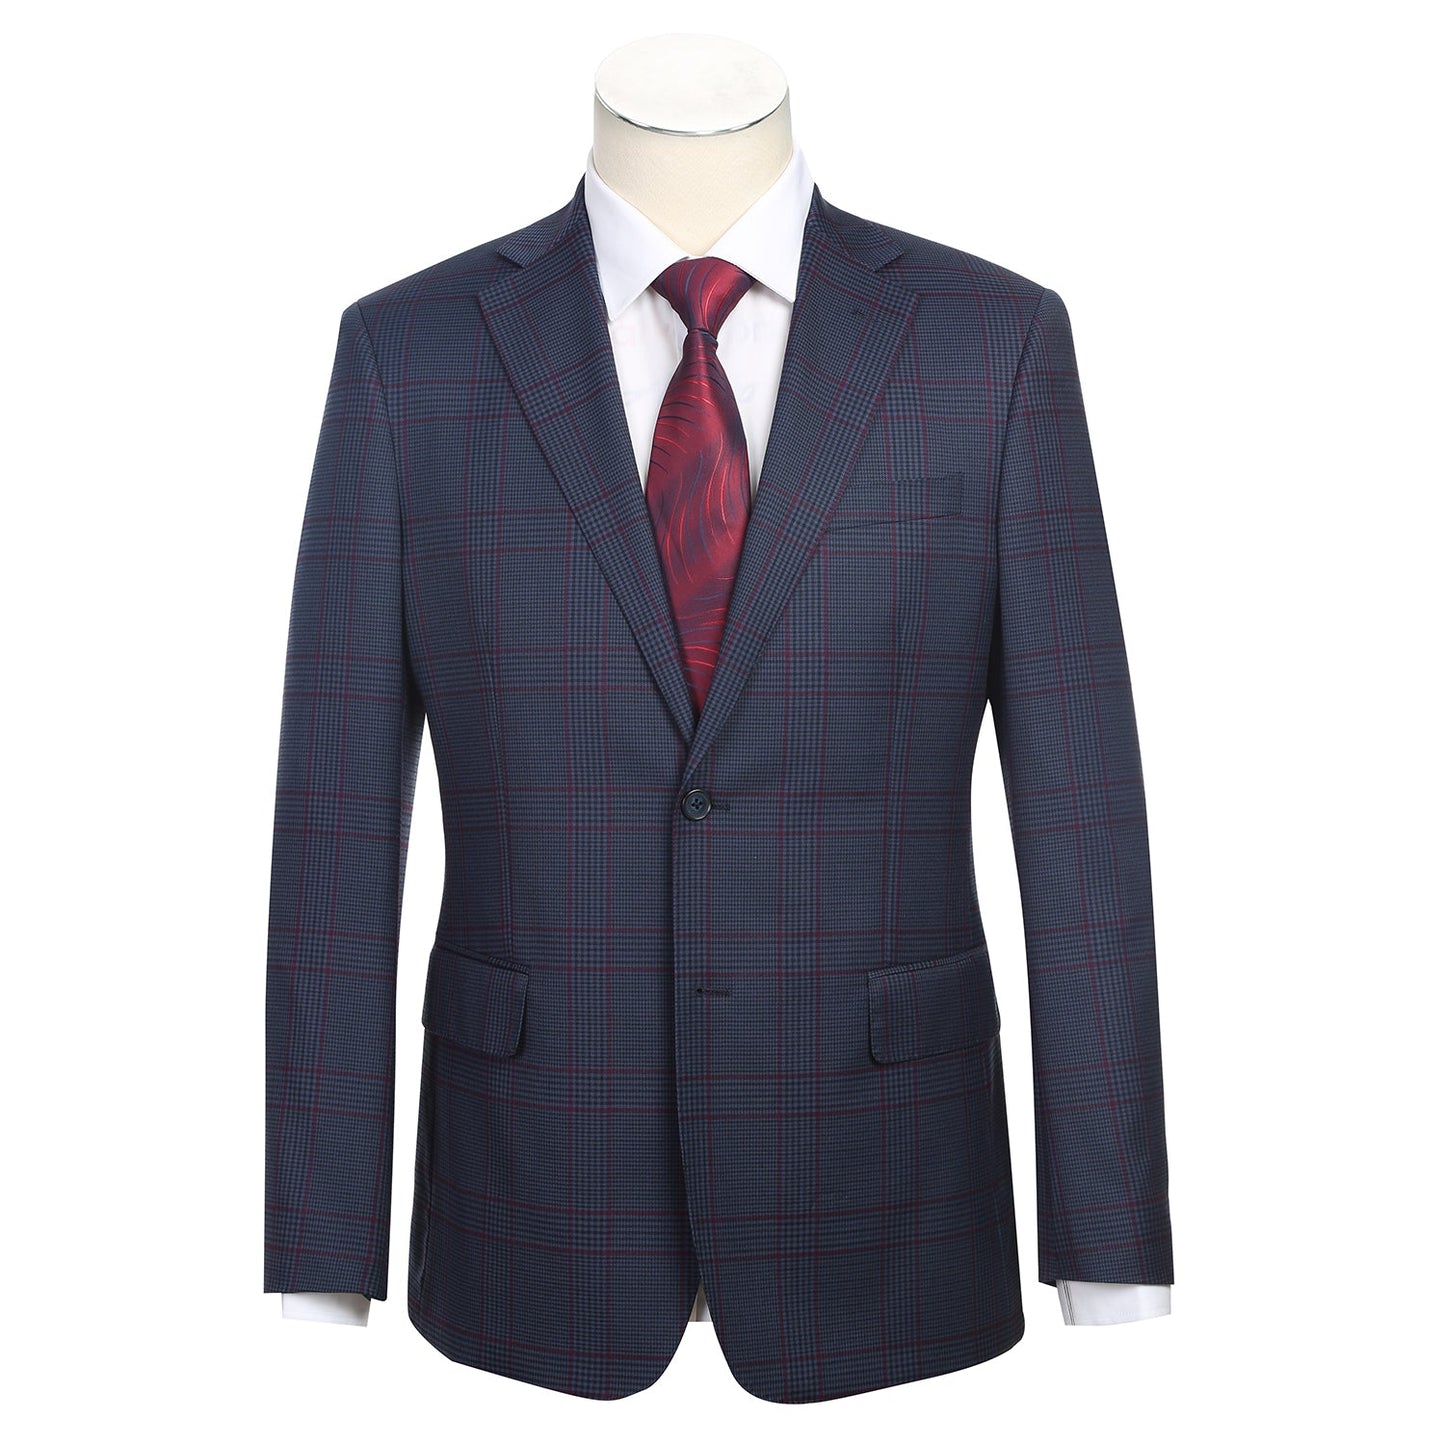 92-55-412EL Slim Fit English Laundry Blue with Burgundy Check Suit